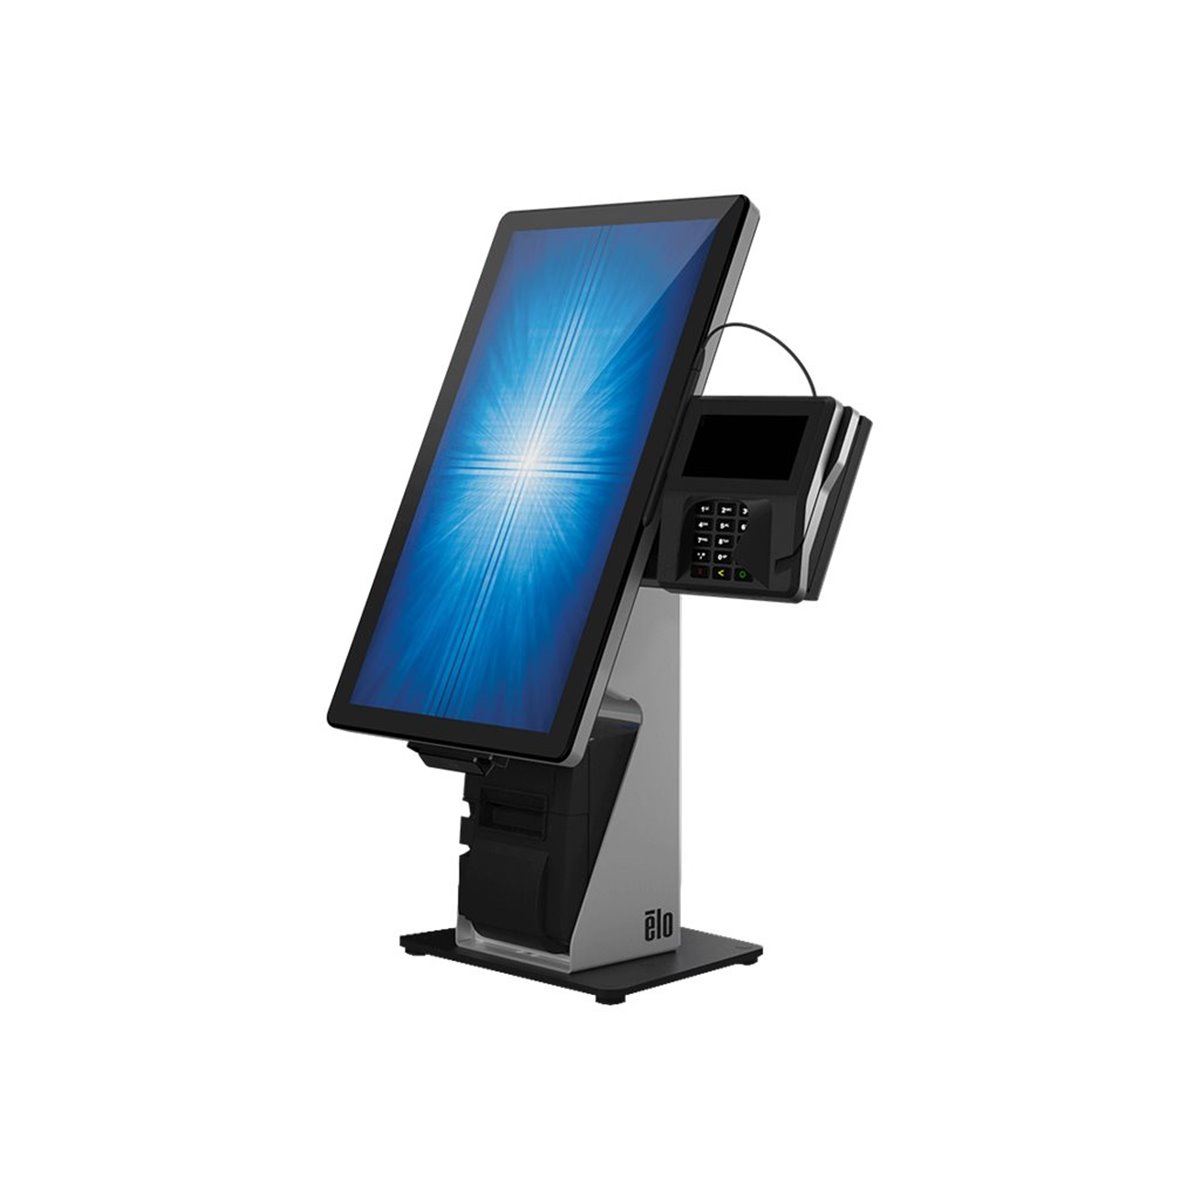 Wallaby self-service countertop stand, compatible with 15-inch or 22-inch Android I-Series 4 and Eps